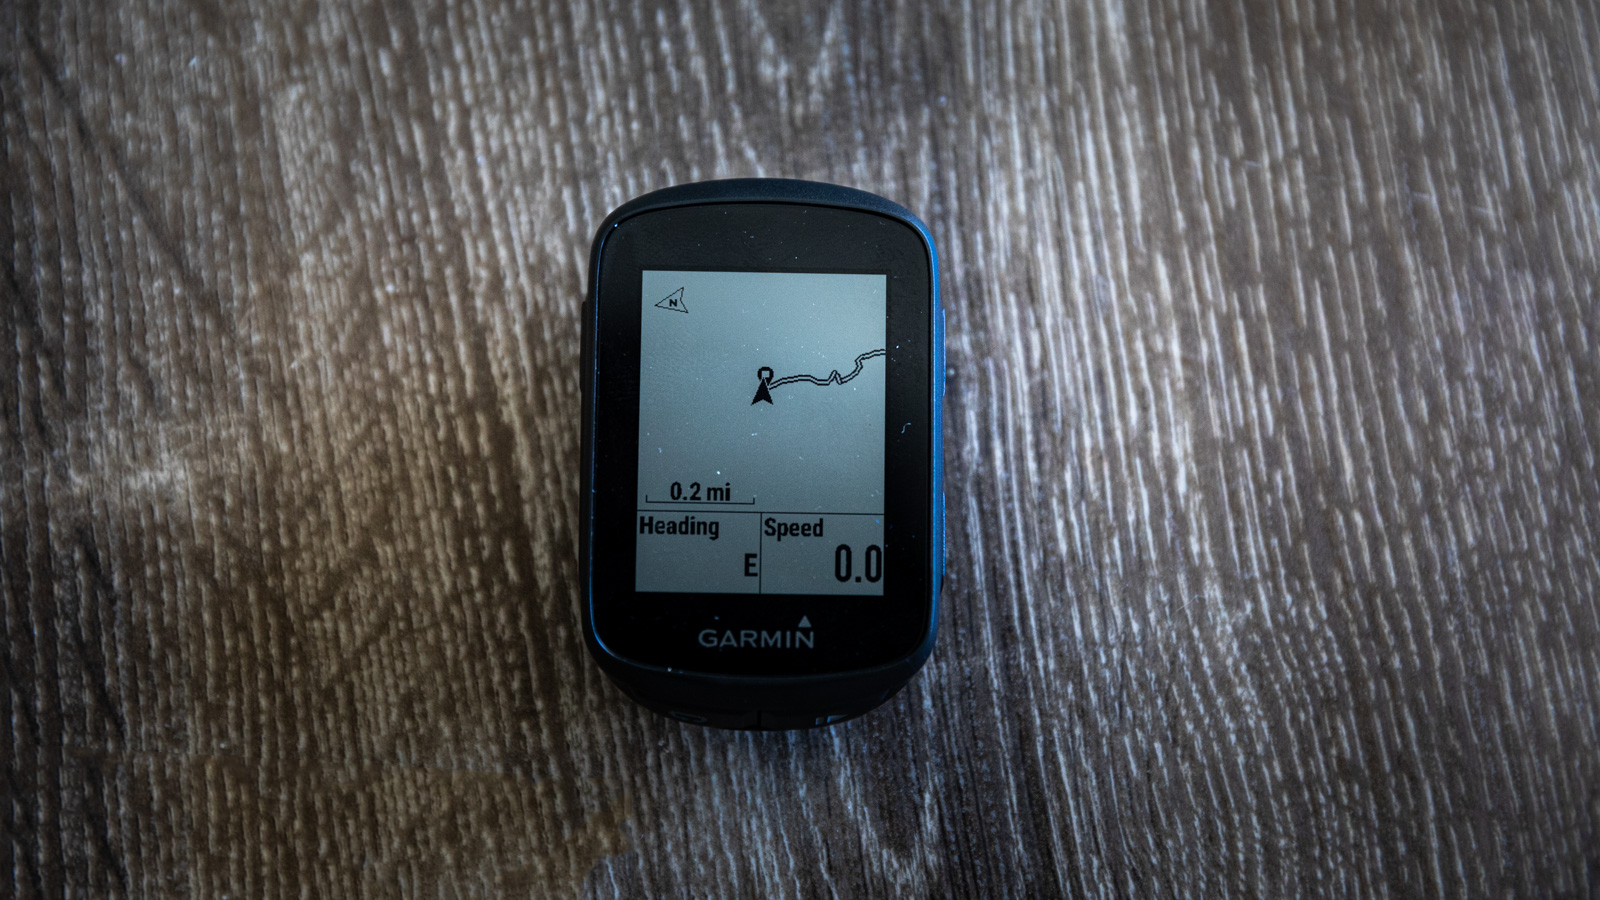 A Garmin Edge 130 Plus cycling computer on a wooden surface, with a basic map showing the current location and a route line, with 'heading' showing East and 'speed' showing 0.0mph